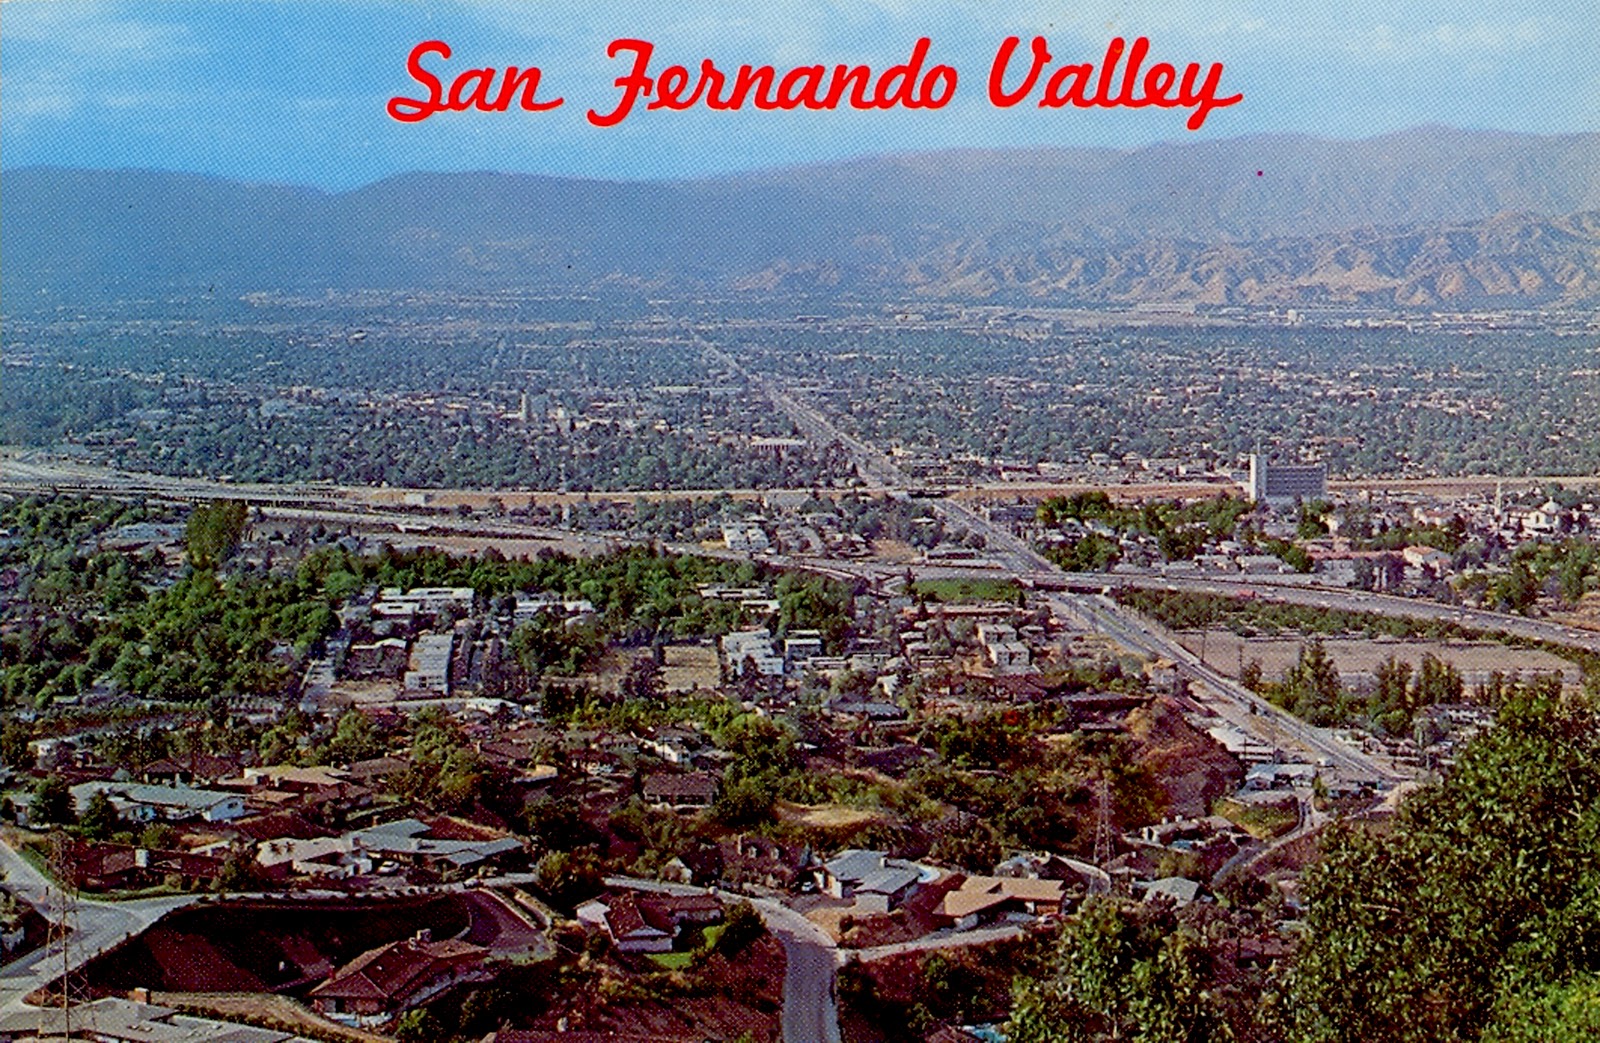 The Museum of the San Fernando Valley WHERE IS THIS VIEW OF THE 